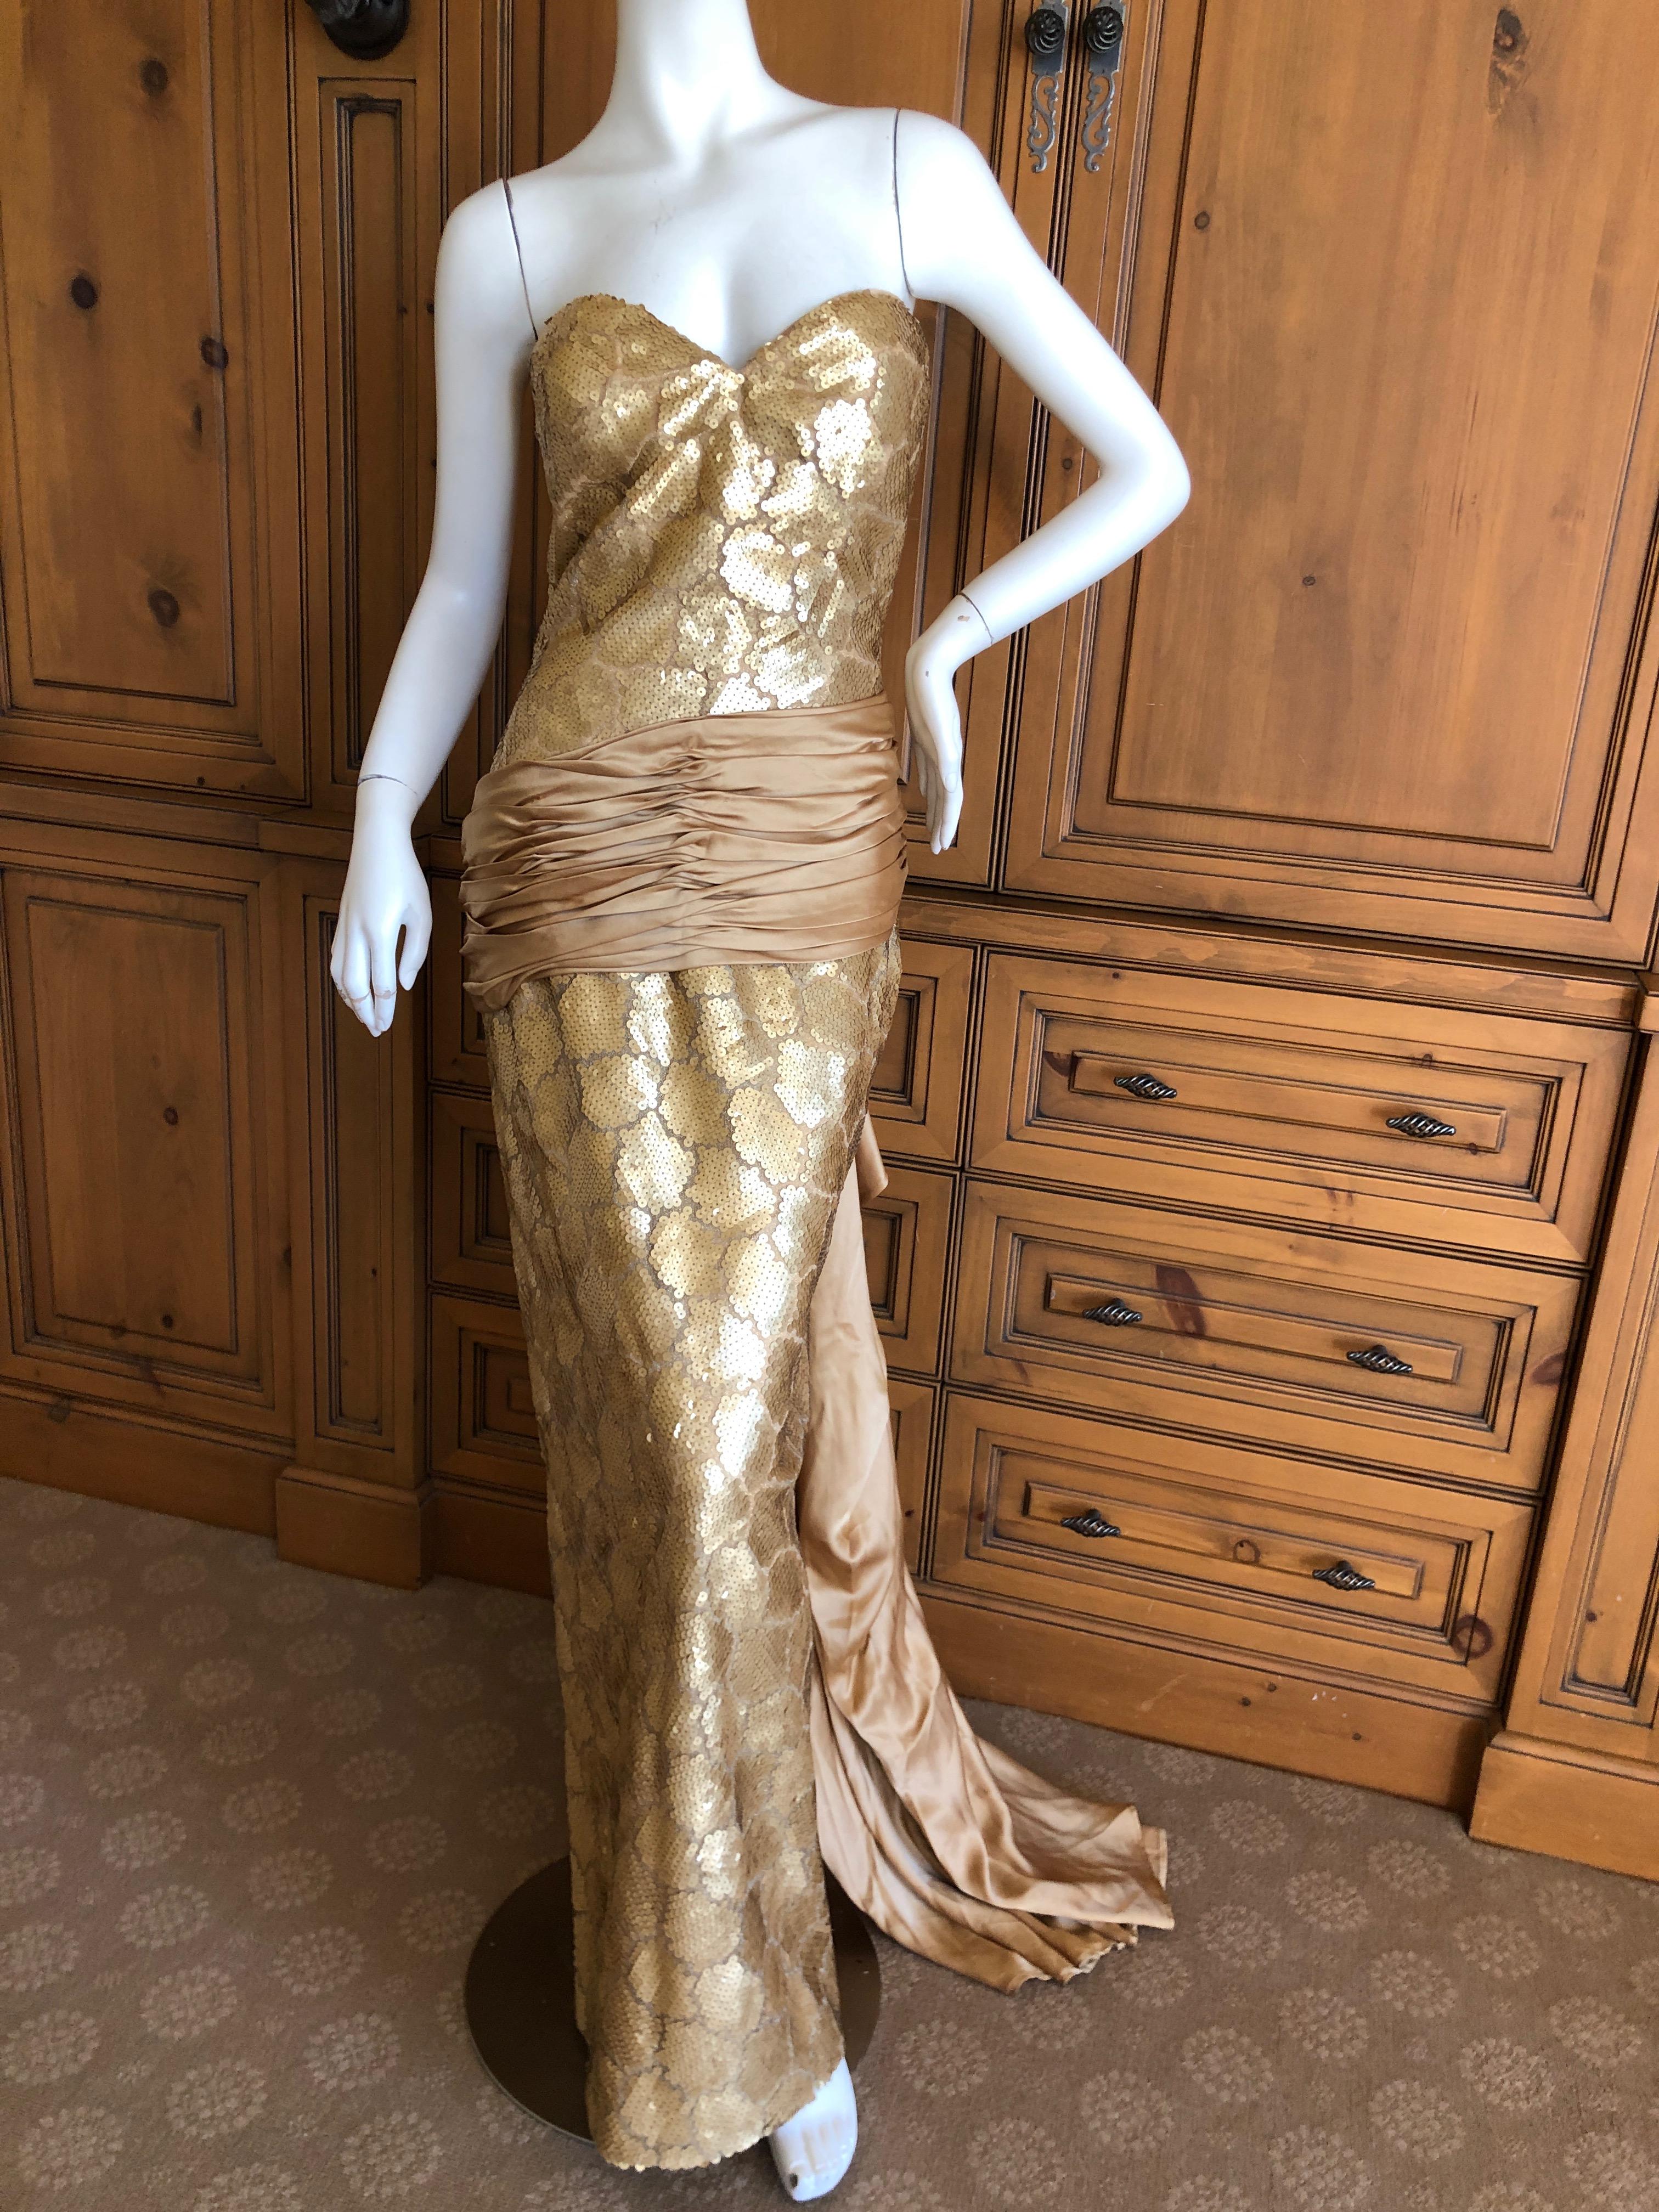 Loris Azzaro Couture 1970s Sequin Accented Gold Dress with Waist Sash Train For Sale 1